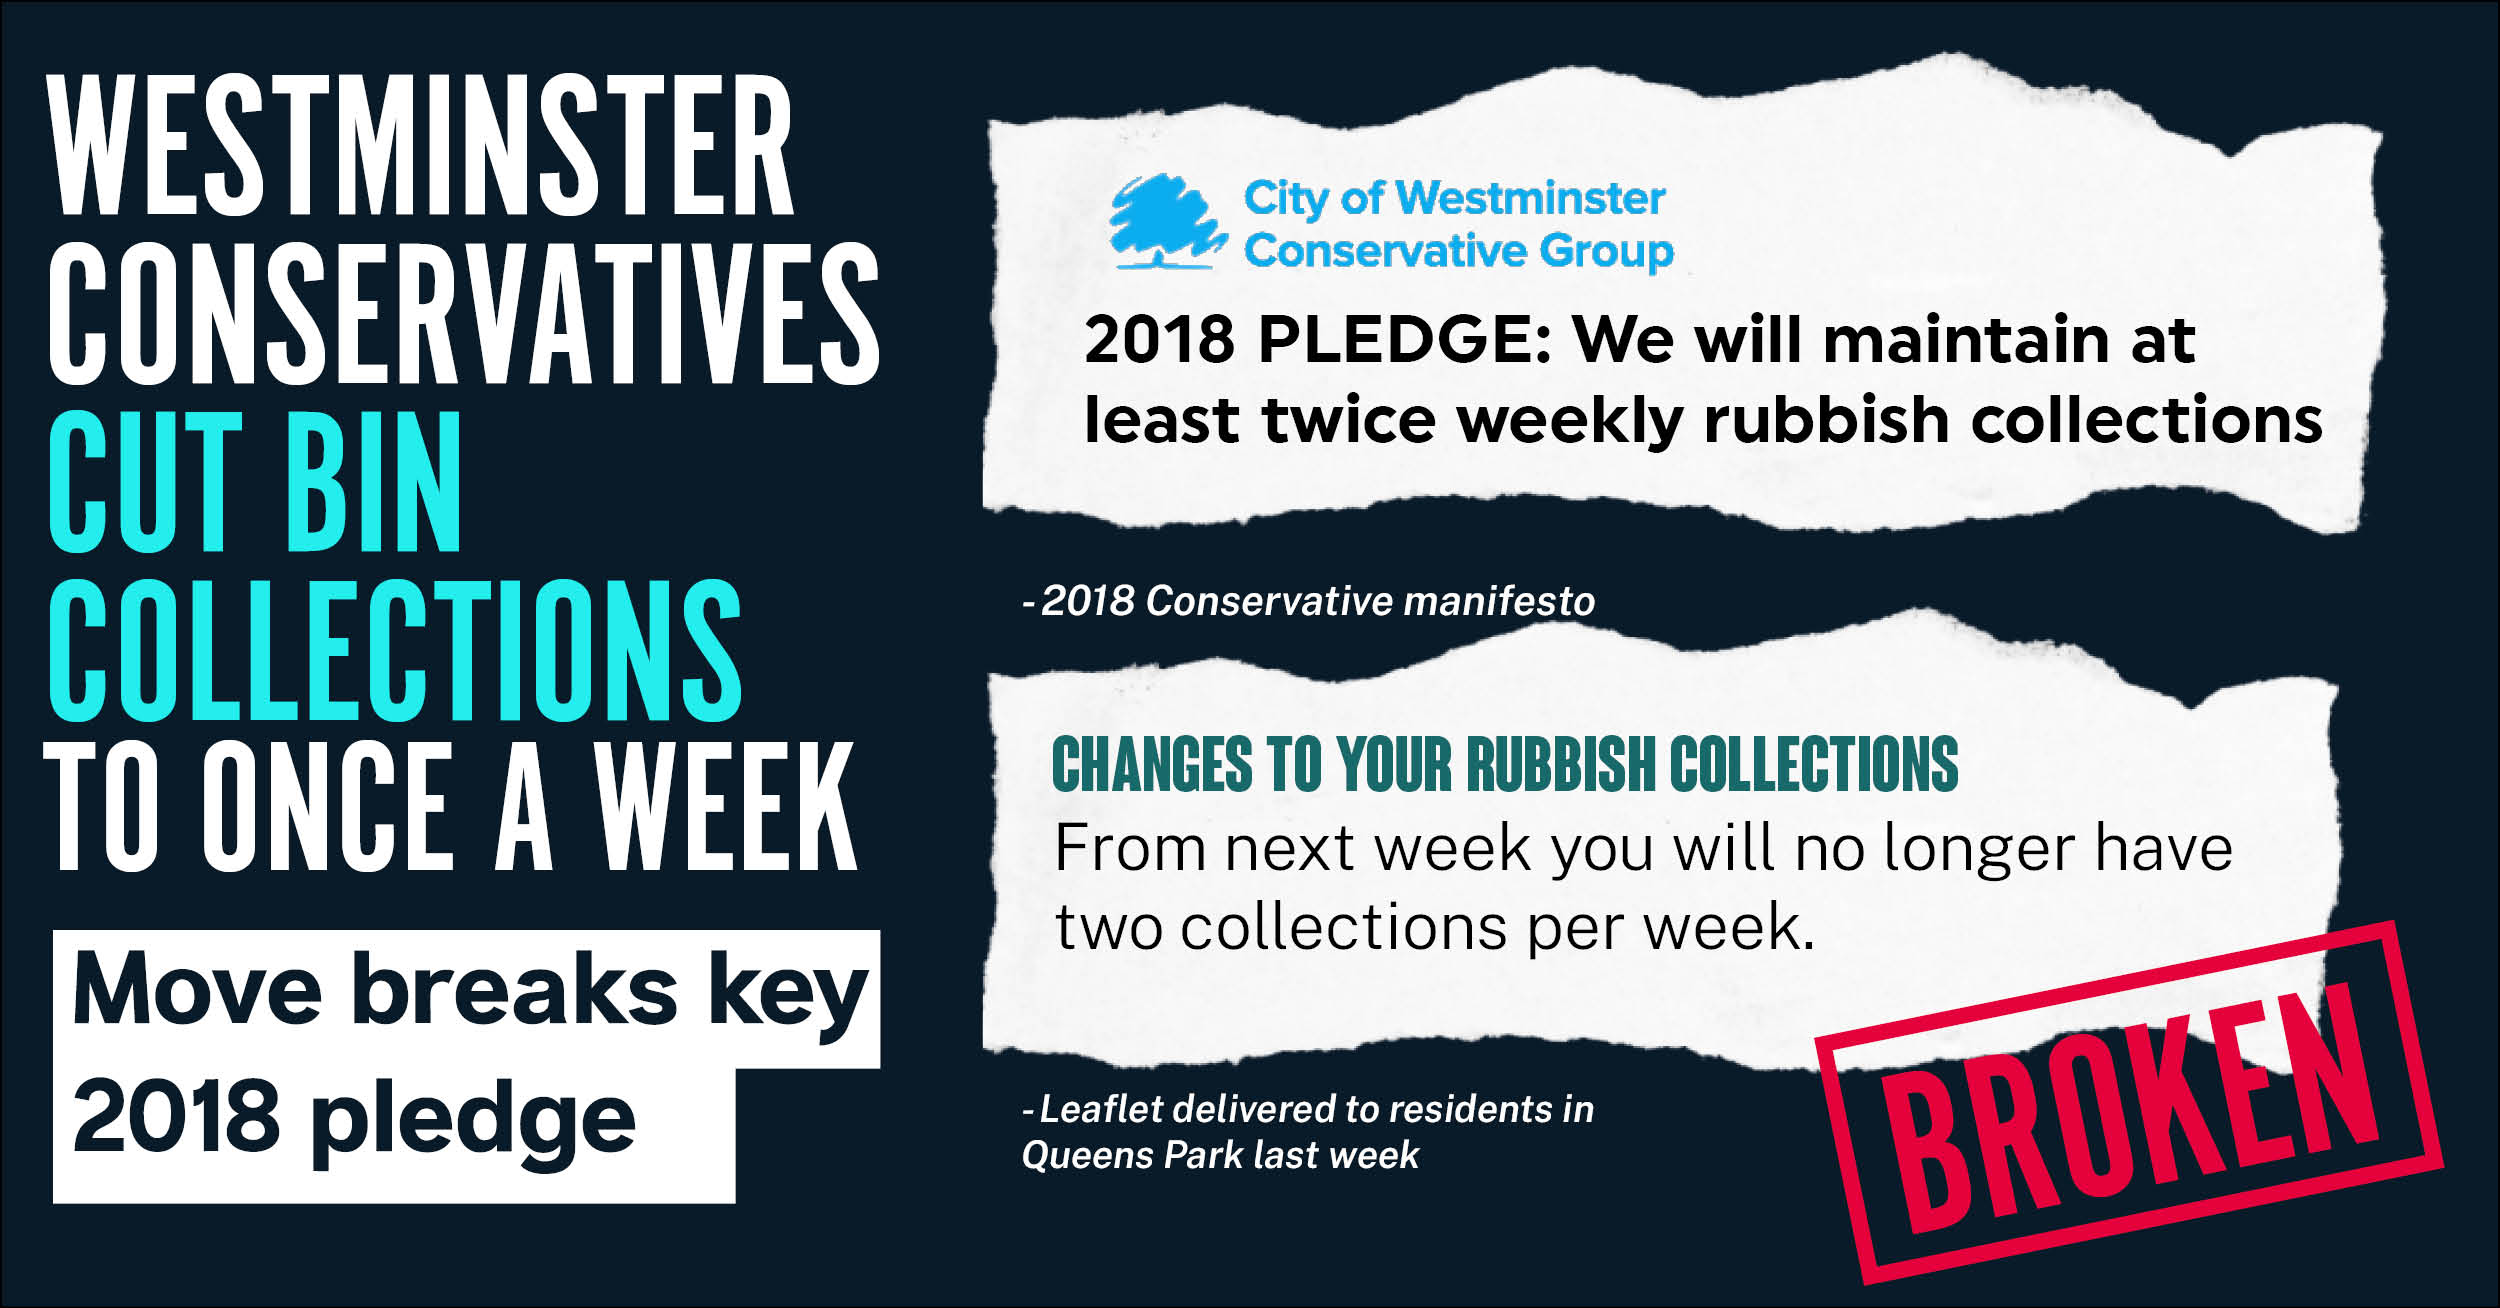 Westminster Conservatives bin collections